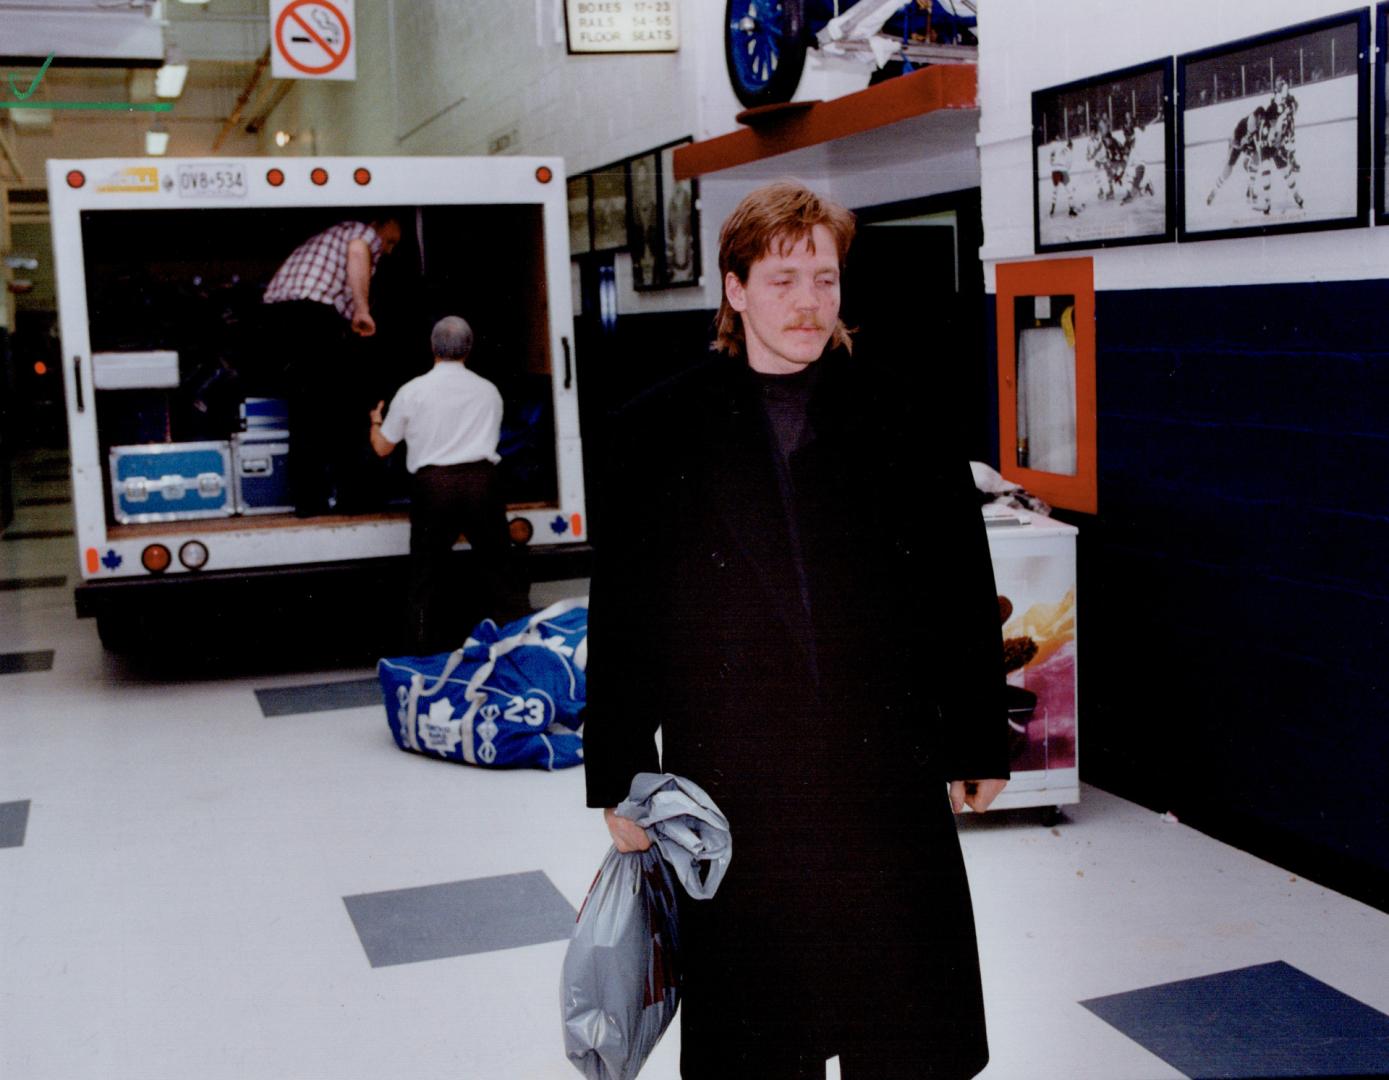 Gary Leeman leaves Toronto Maple Leaf dressing room yesterday for last time after being traded to the Calgary Flames as part of the biggest player swap in NHL history